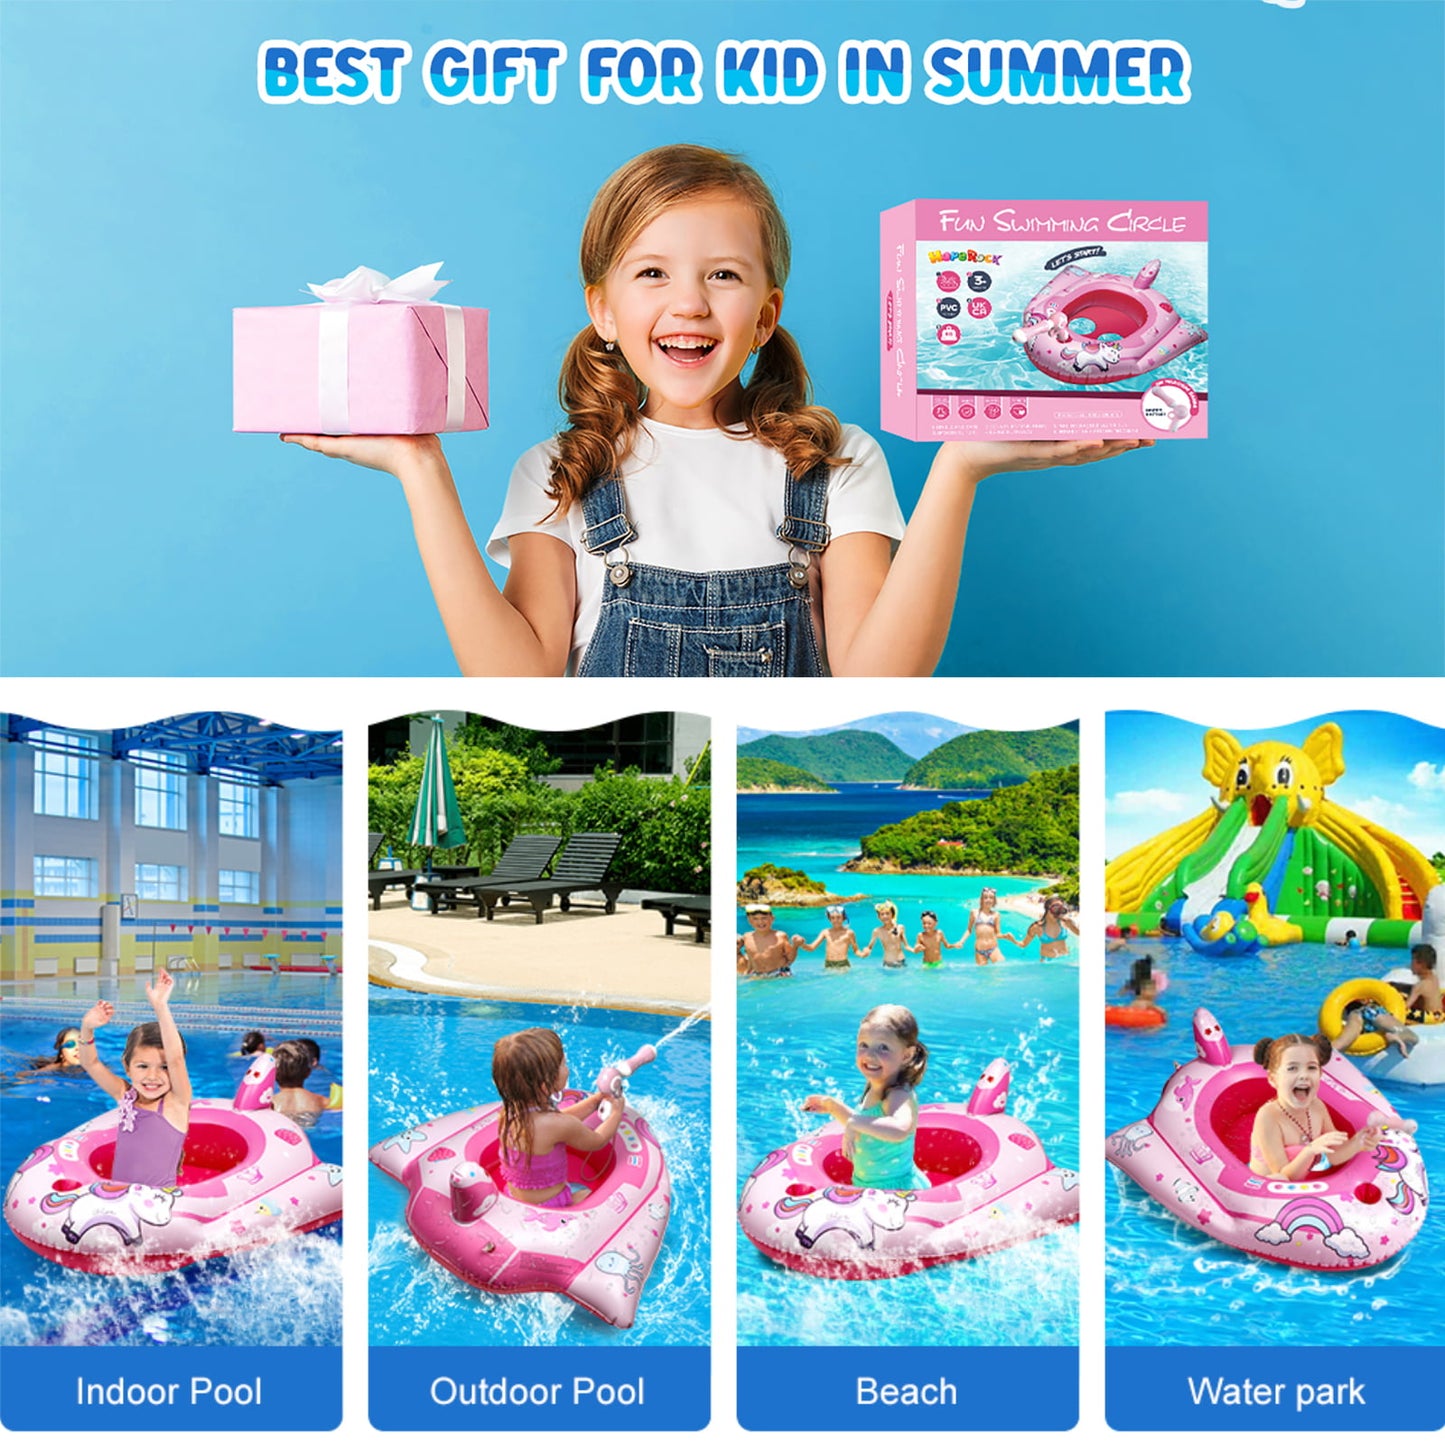 Kids Pool Float with Water Gun, Inflatable Pool Toys for Toddlers, Ride-on Unicorn Swimming Pool Toys for Boys and Girls for Aged 3-8 Years